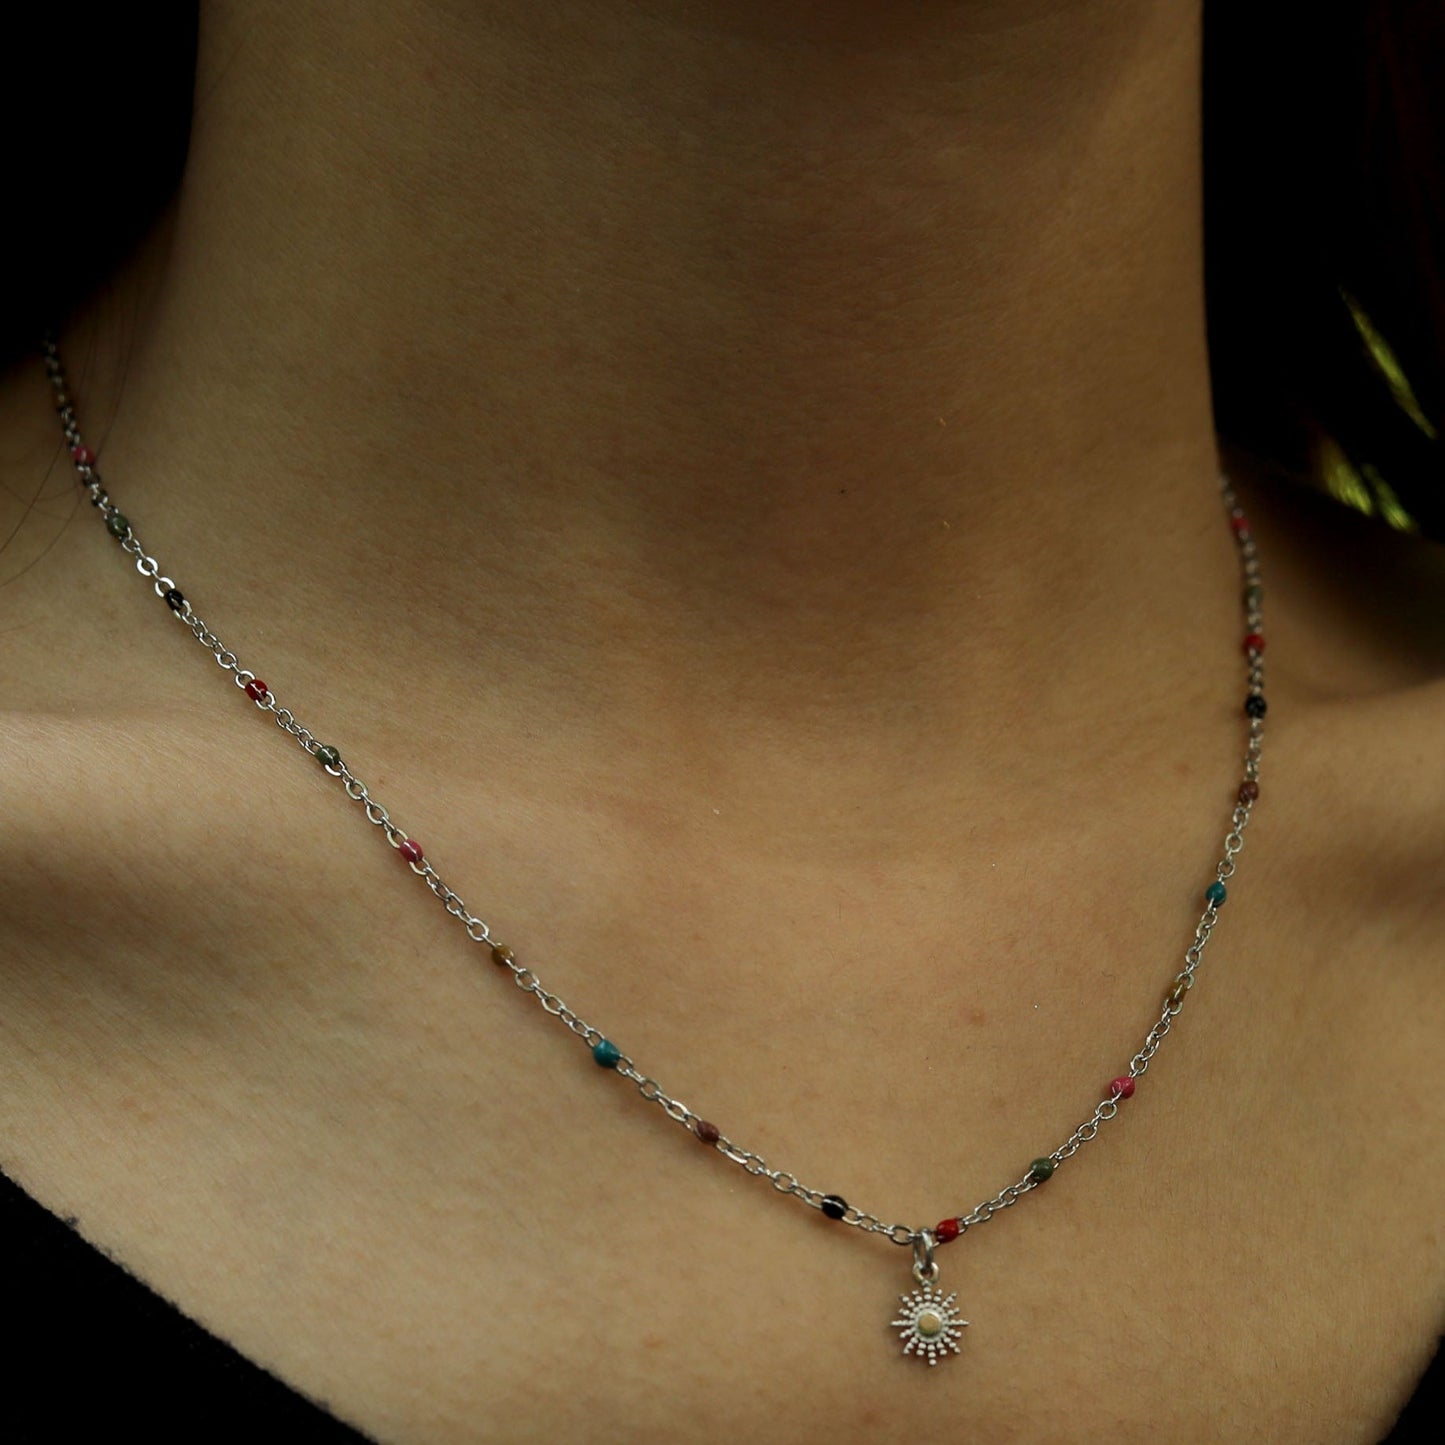 Style MARLOW 2224: Dainty Star Charm & Coloured Dainty Beads on a Silver Chain